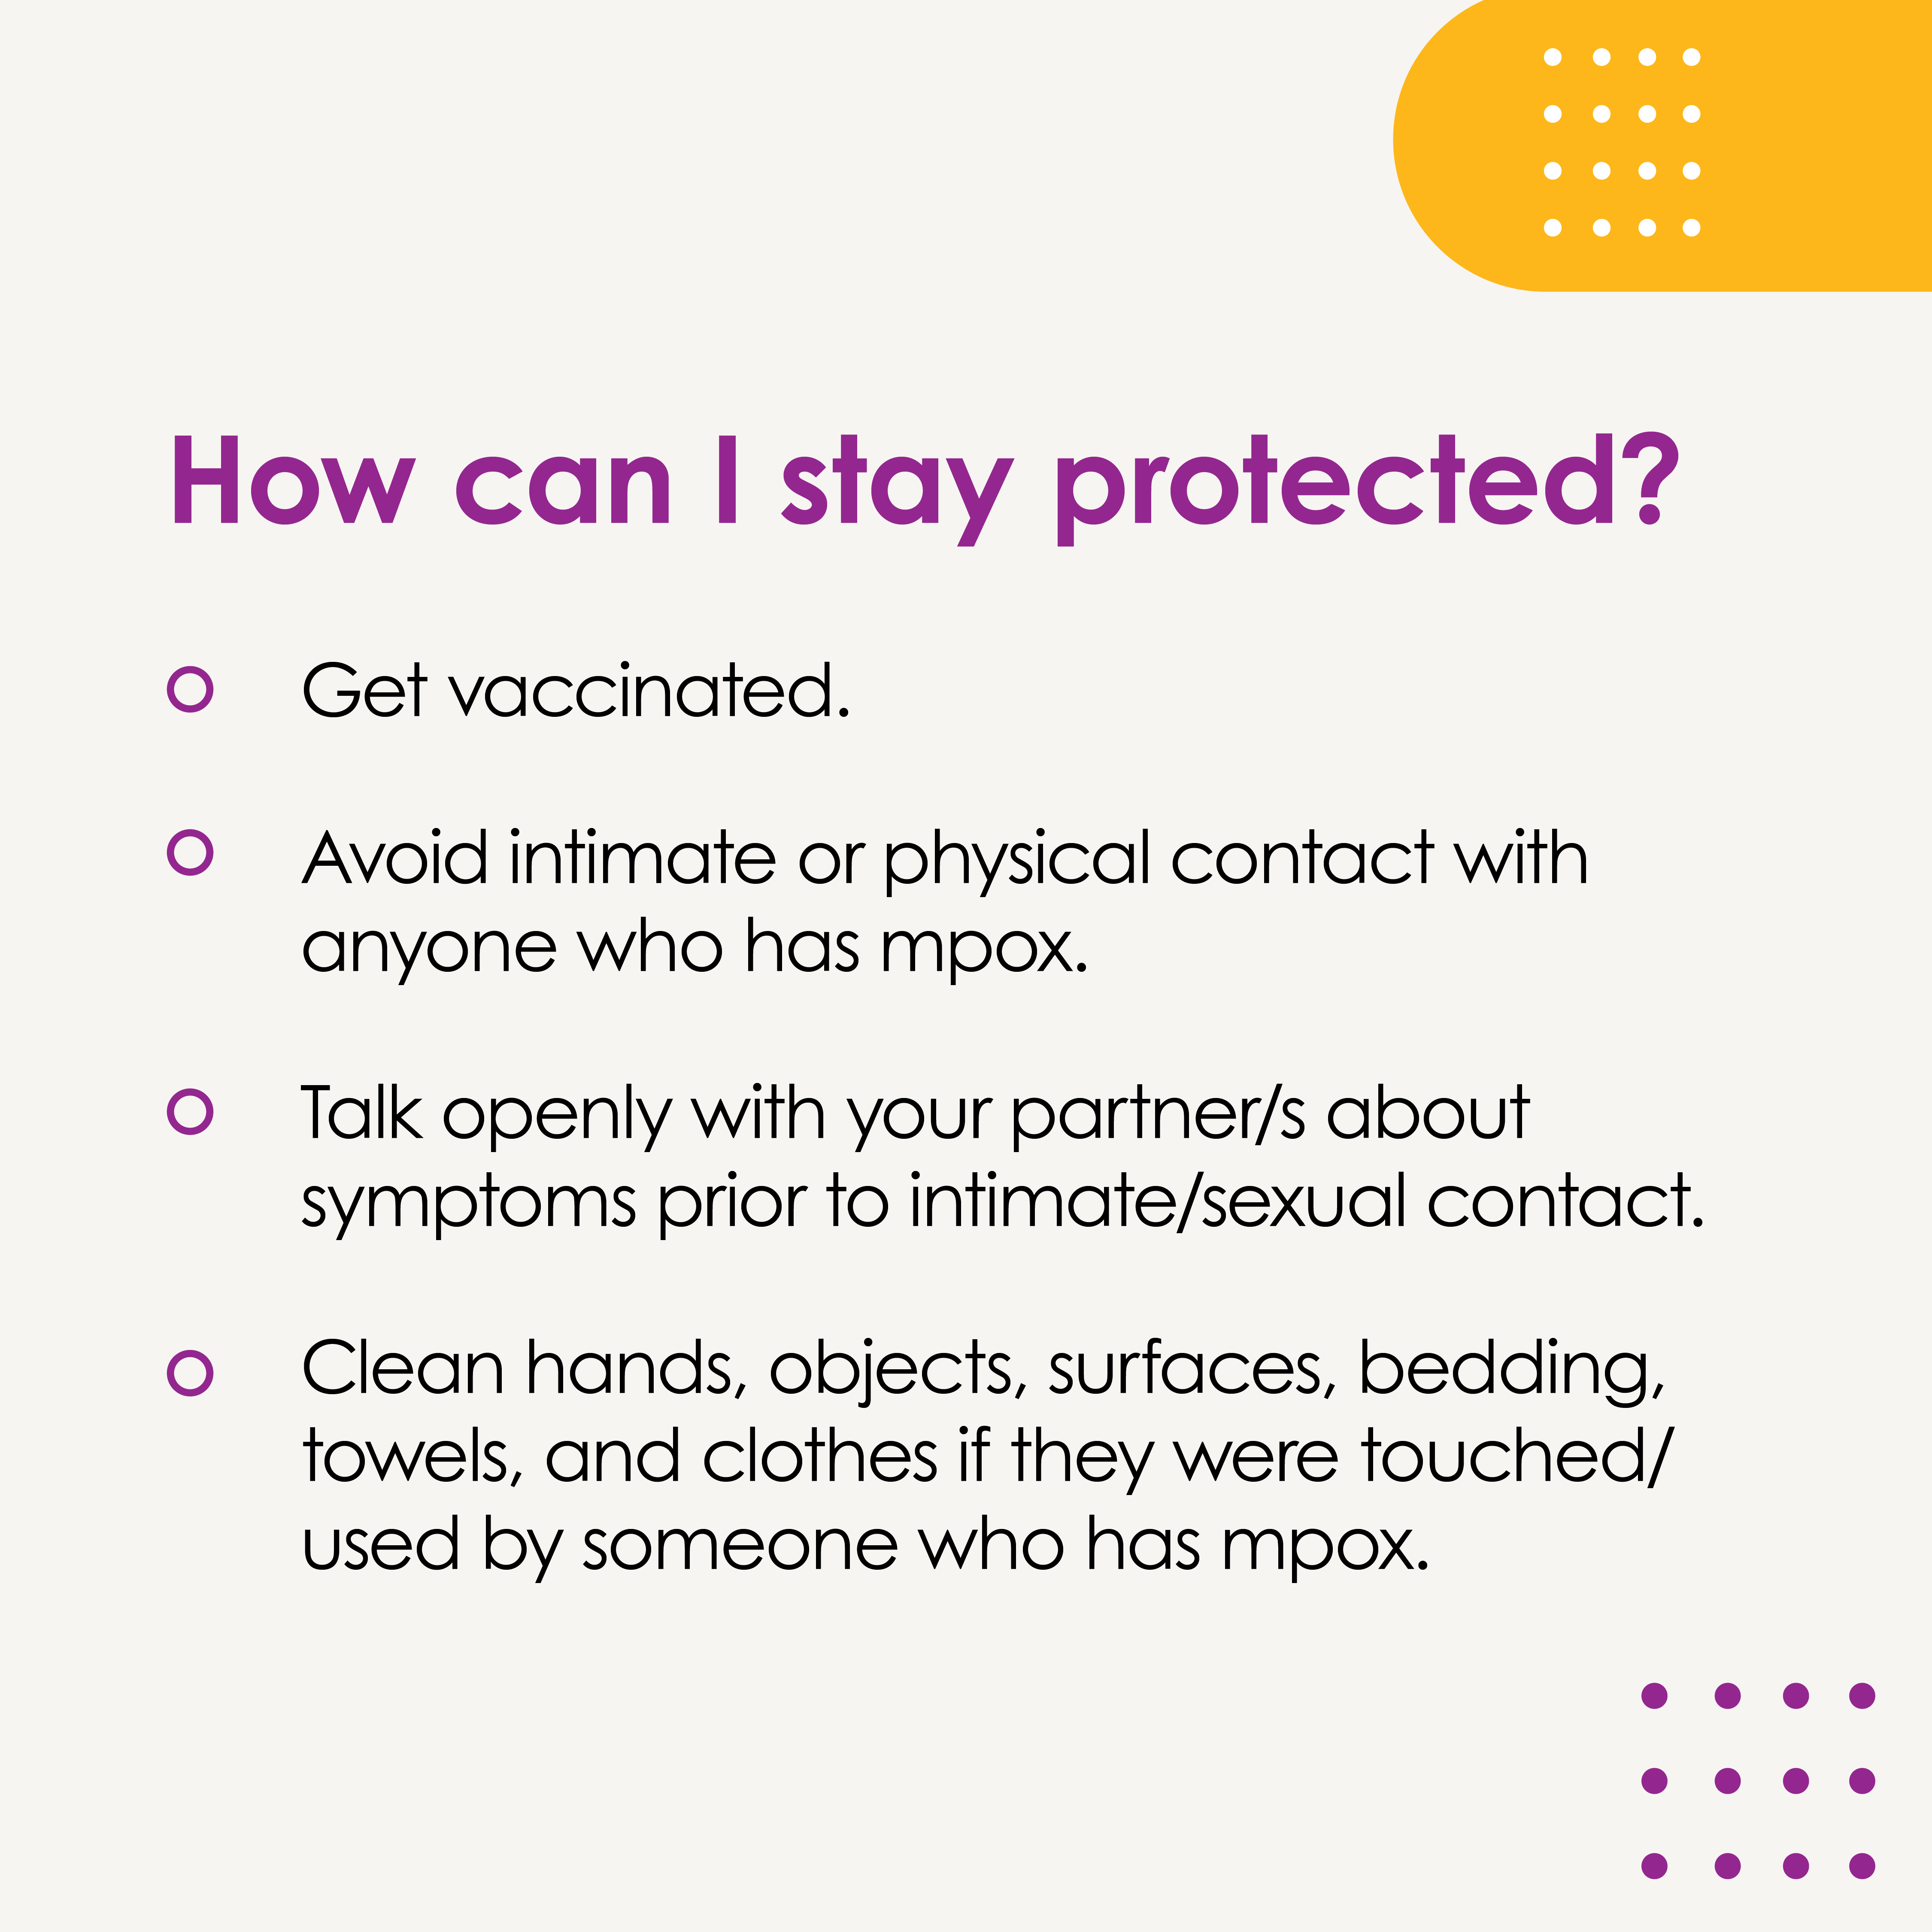 How can I stay protected?